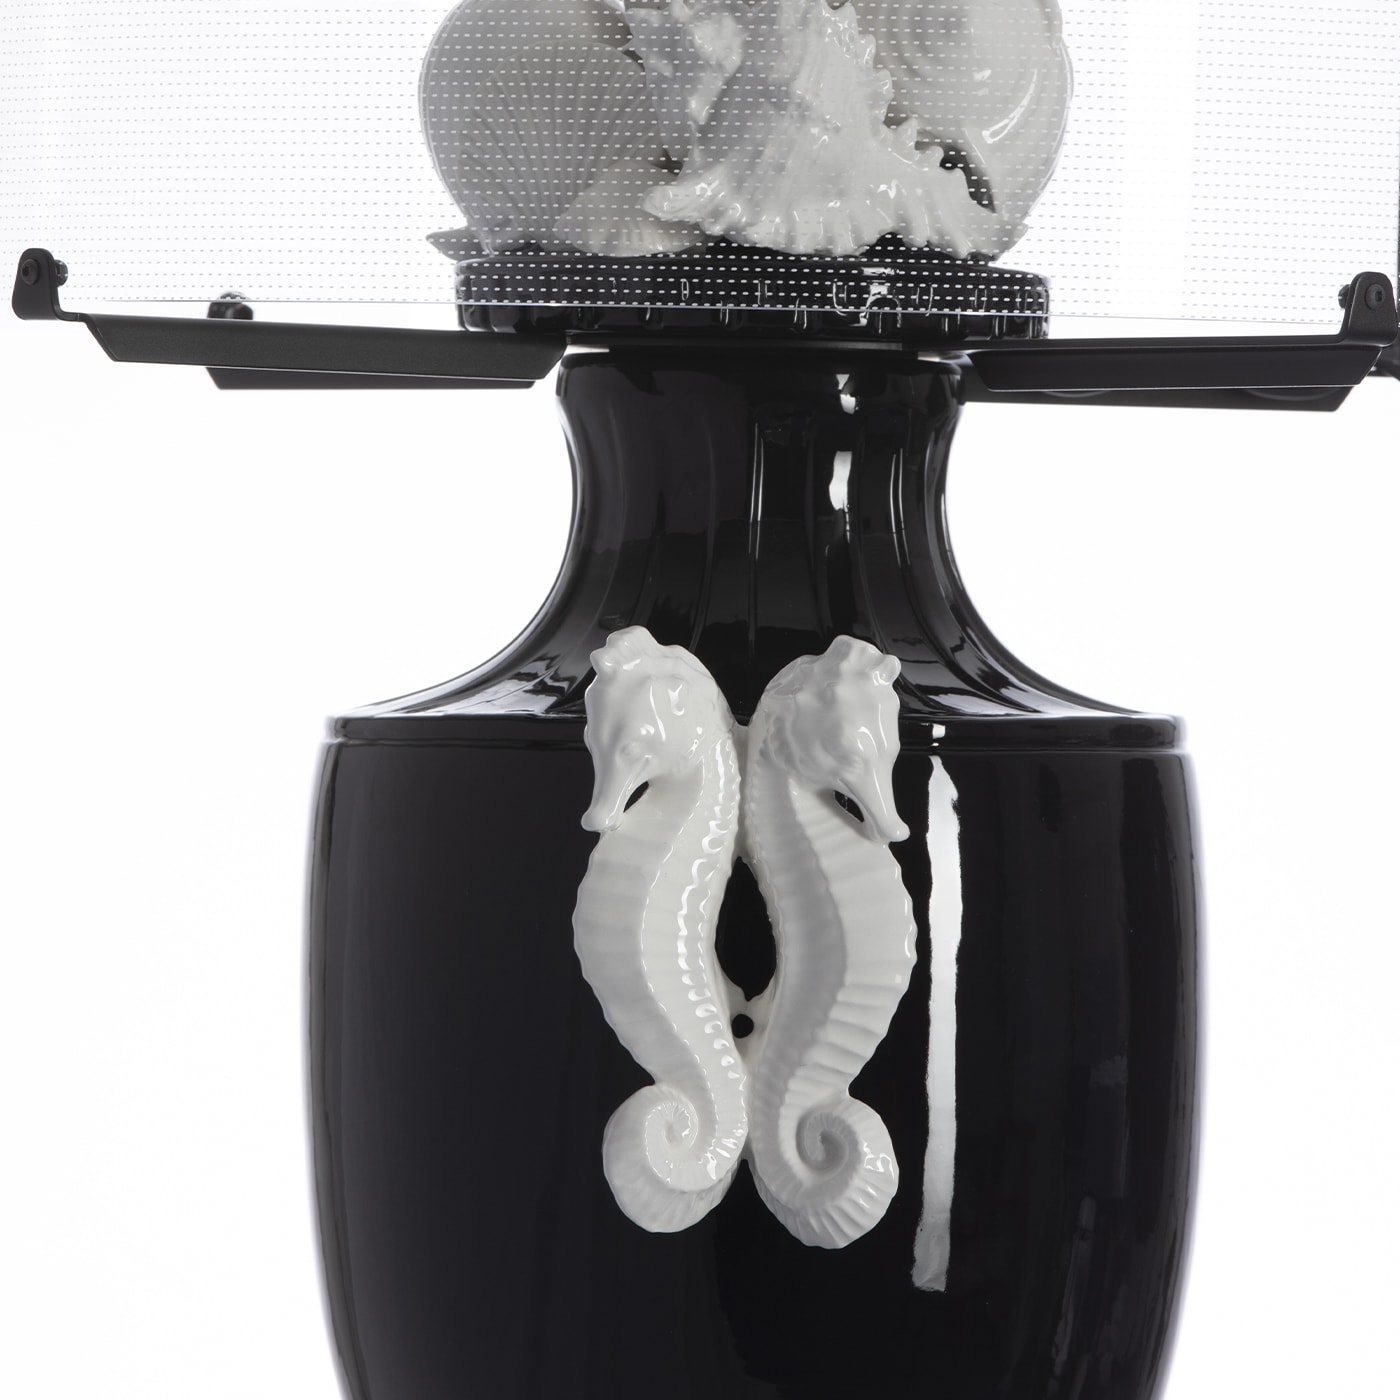 Okeanos Black and White Decòr Table Lamp  - Les First